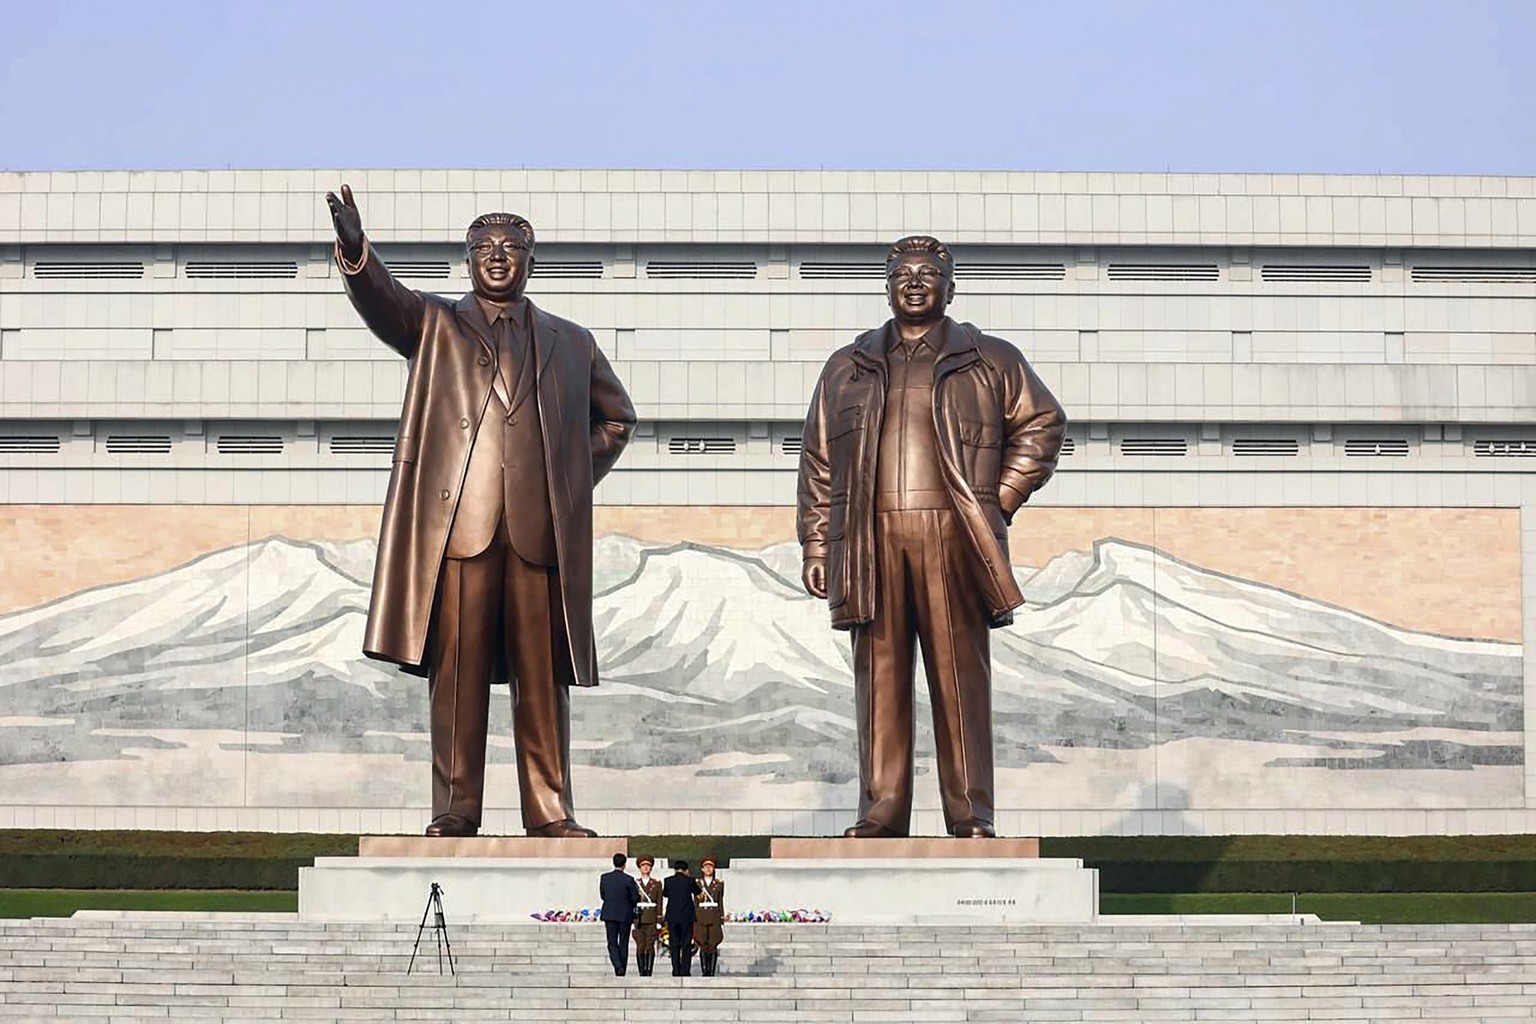 epa10926888 A handout photo provided by the Russian Foreign Ministry's press service shows bronze statues of late North Korean leaders Kim Il Sung and Kim Jong Il at the Mansu Hill Grand Monument.